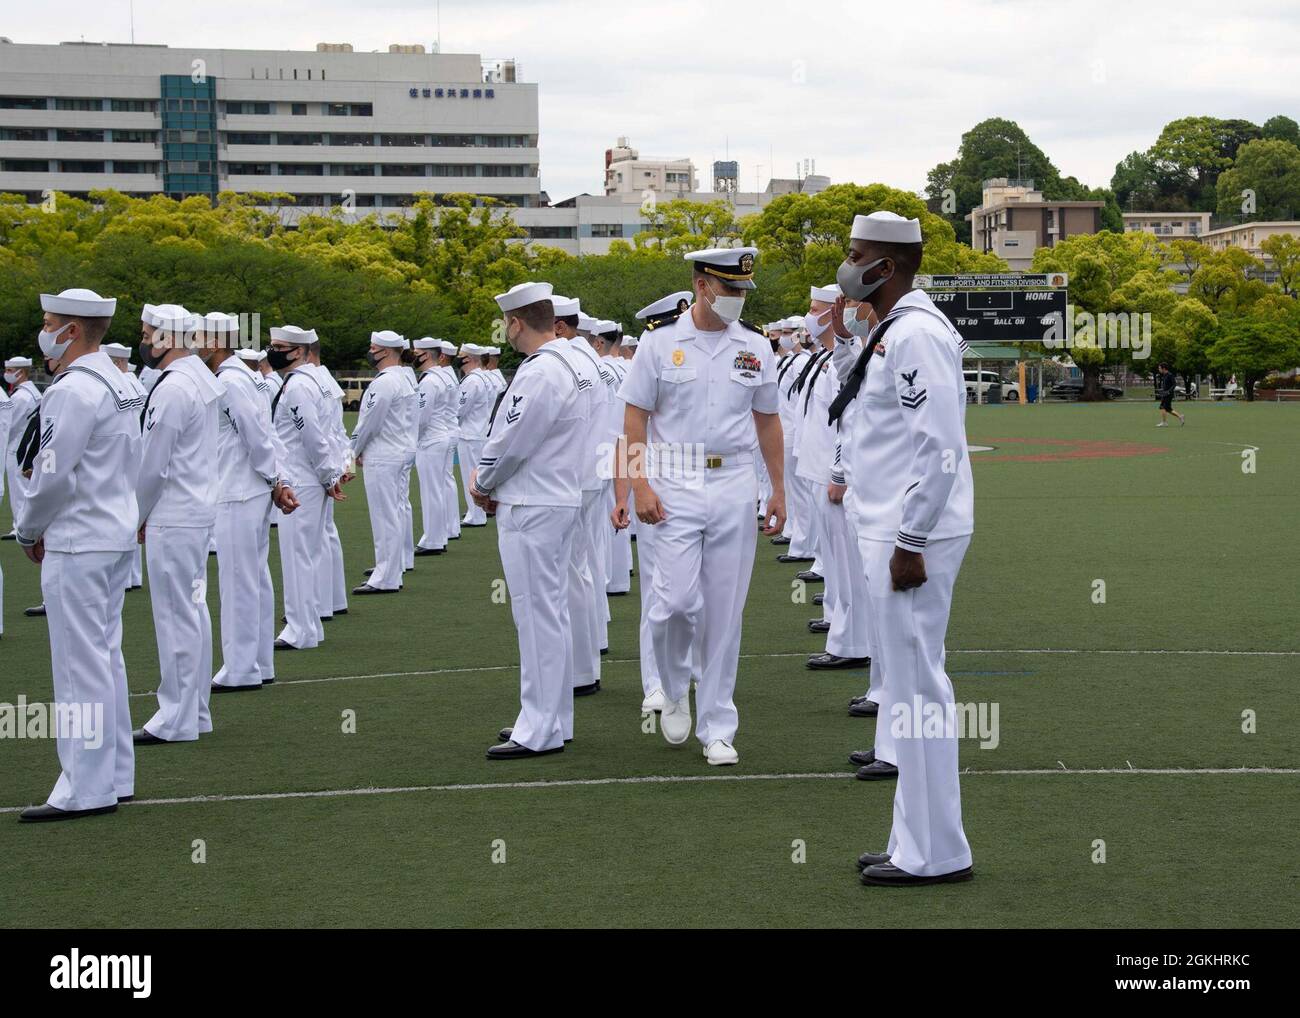 SASEBO, Japan (April 27, 2021) – Commander, Fleet Activities Sasebo’s Assistant Security Officer Ens. Zachery J. Bixby conducts a uniform inspection at Nimitz Park in Sasebo, Japan April 27, 2021. CFAS and other Commander, Navy Region Japan installations are scheduled to make the seasonal transition from service dress blues to service dress whites on May 1, 2021. Stock Photo